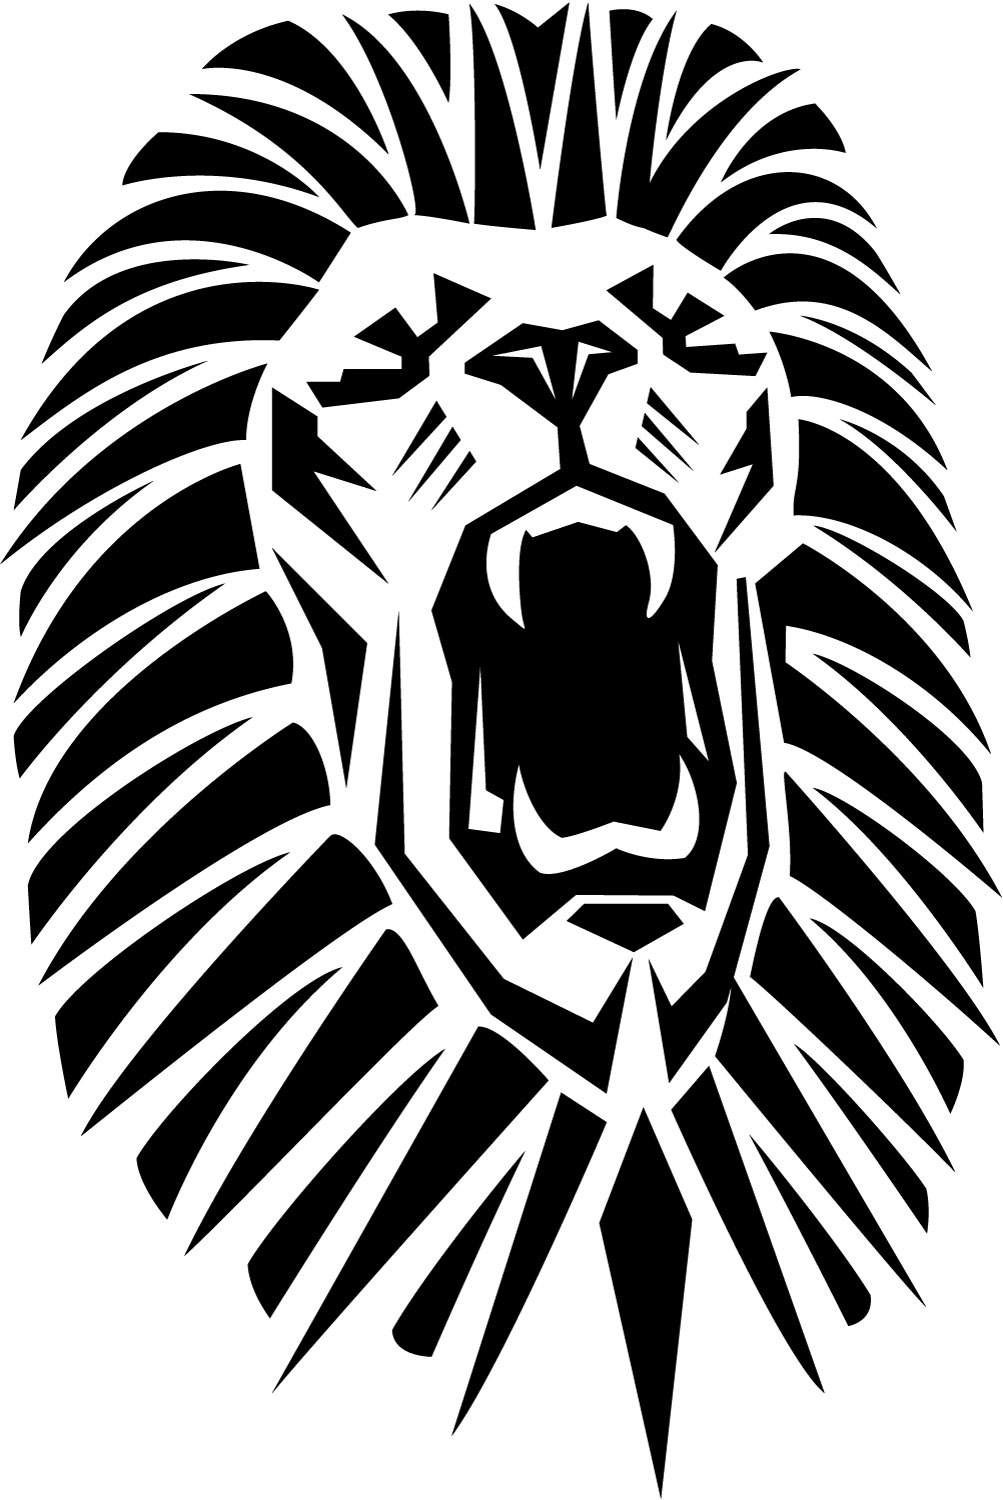 Roaring Lion Artwork Images & Pictures - Becuo